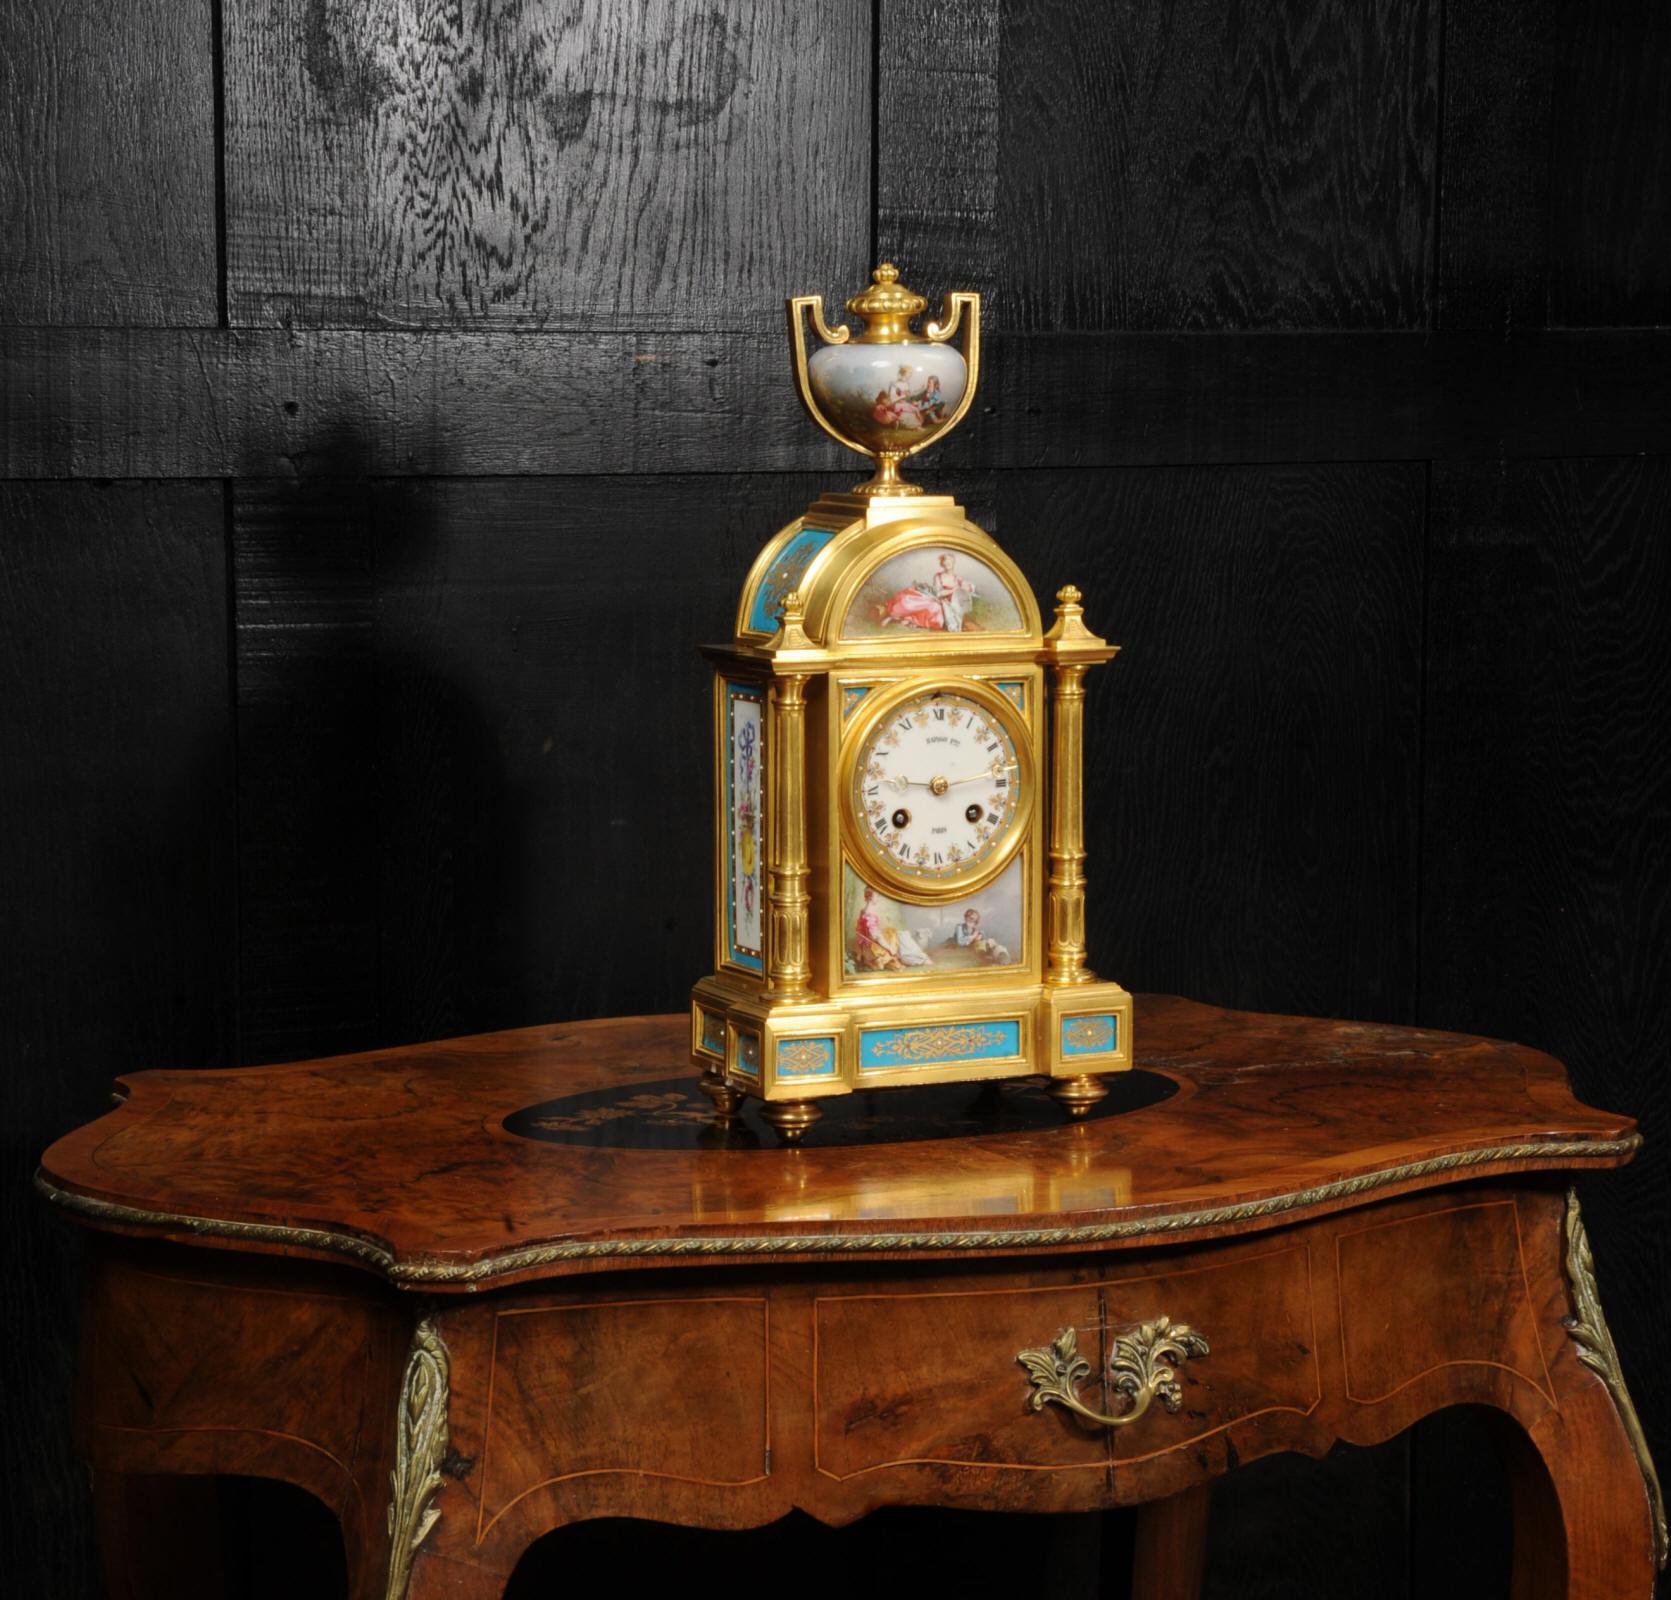 Fine and Early Sevres Porcelain and Ormolu Antique French Clock In Good Condition For Sale In Belper, Derbyshire